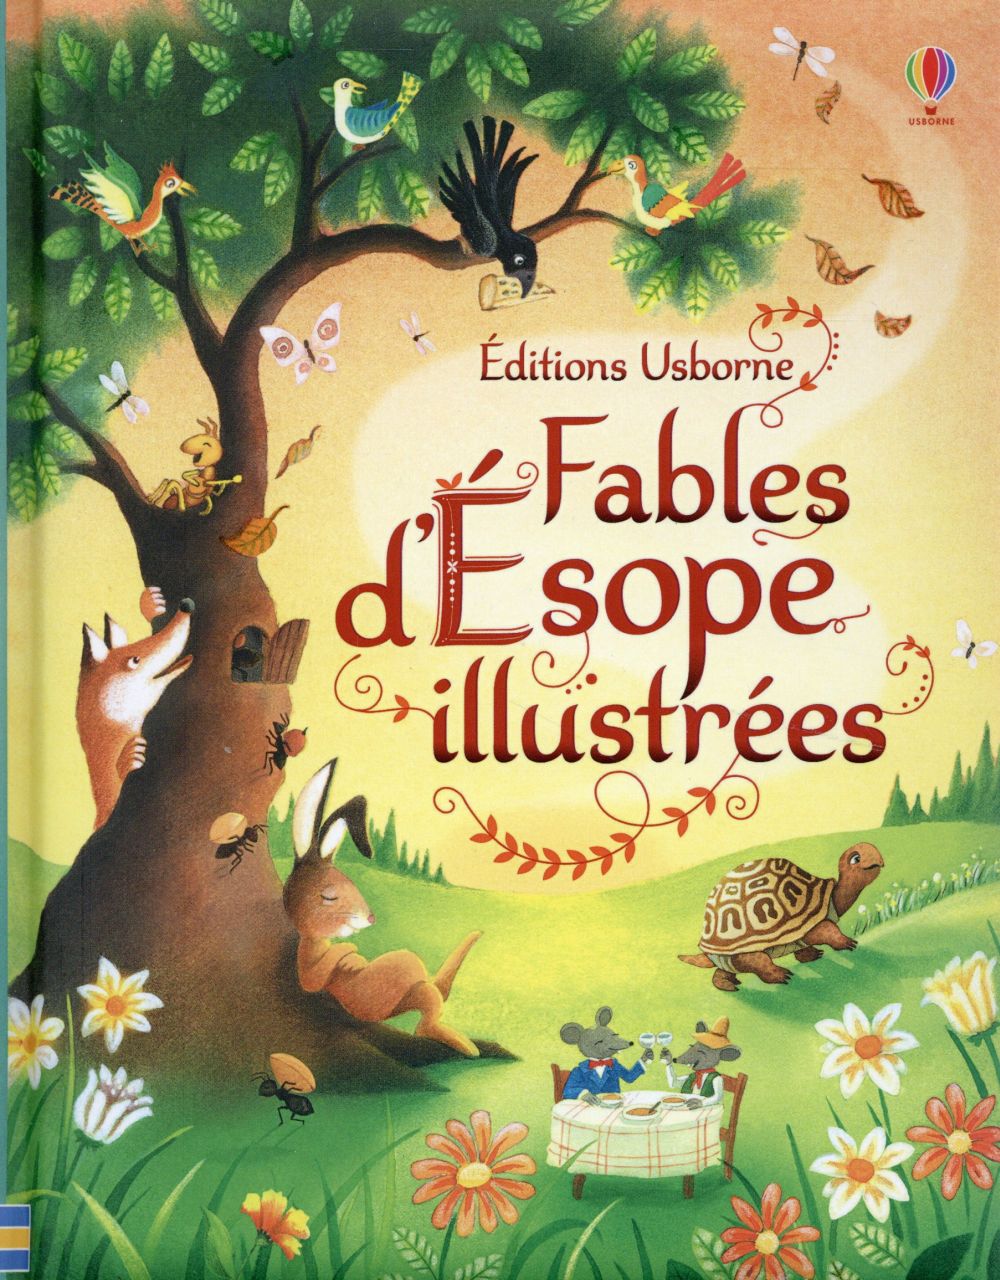 FABLES D'ESOPE ILLUSTREES